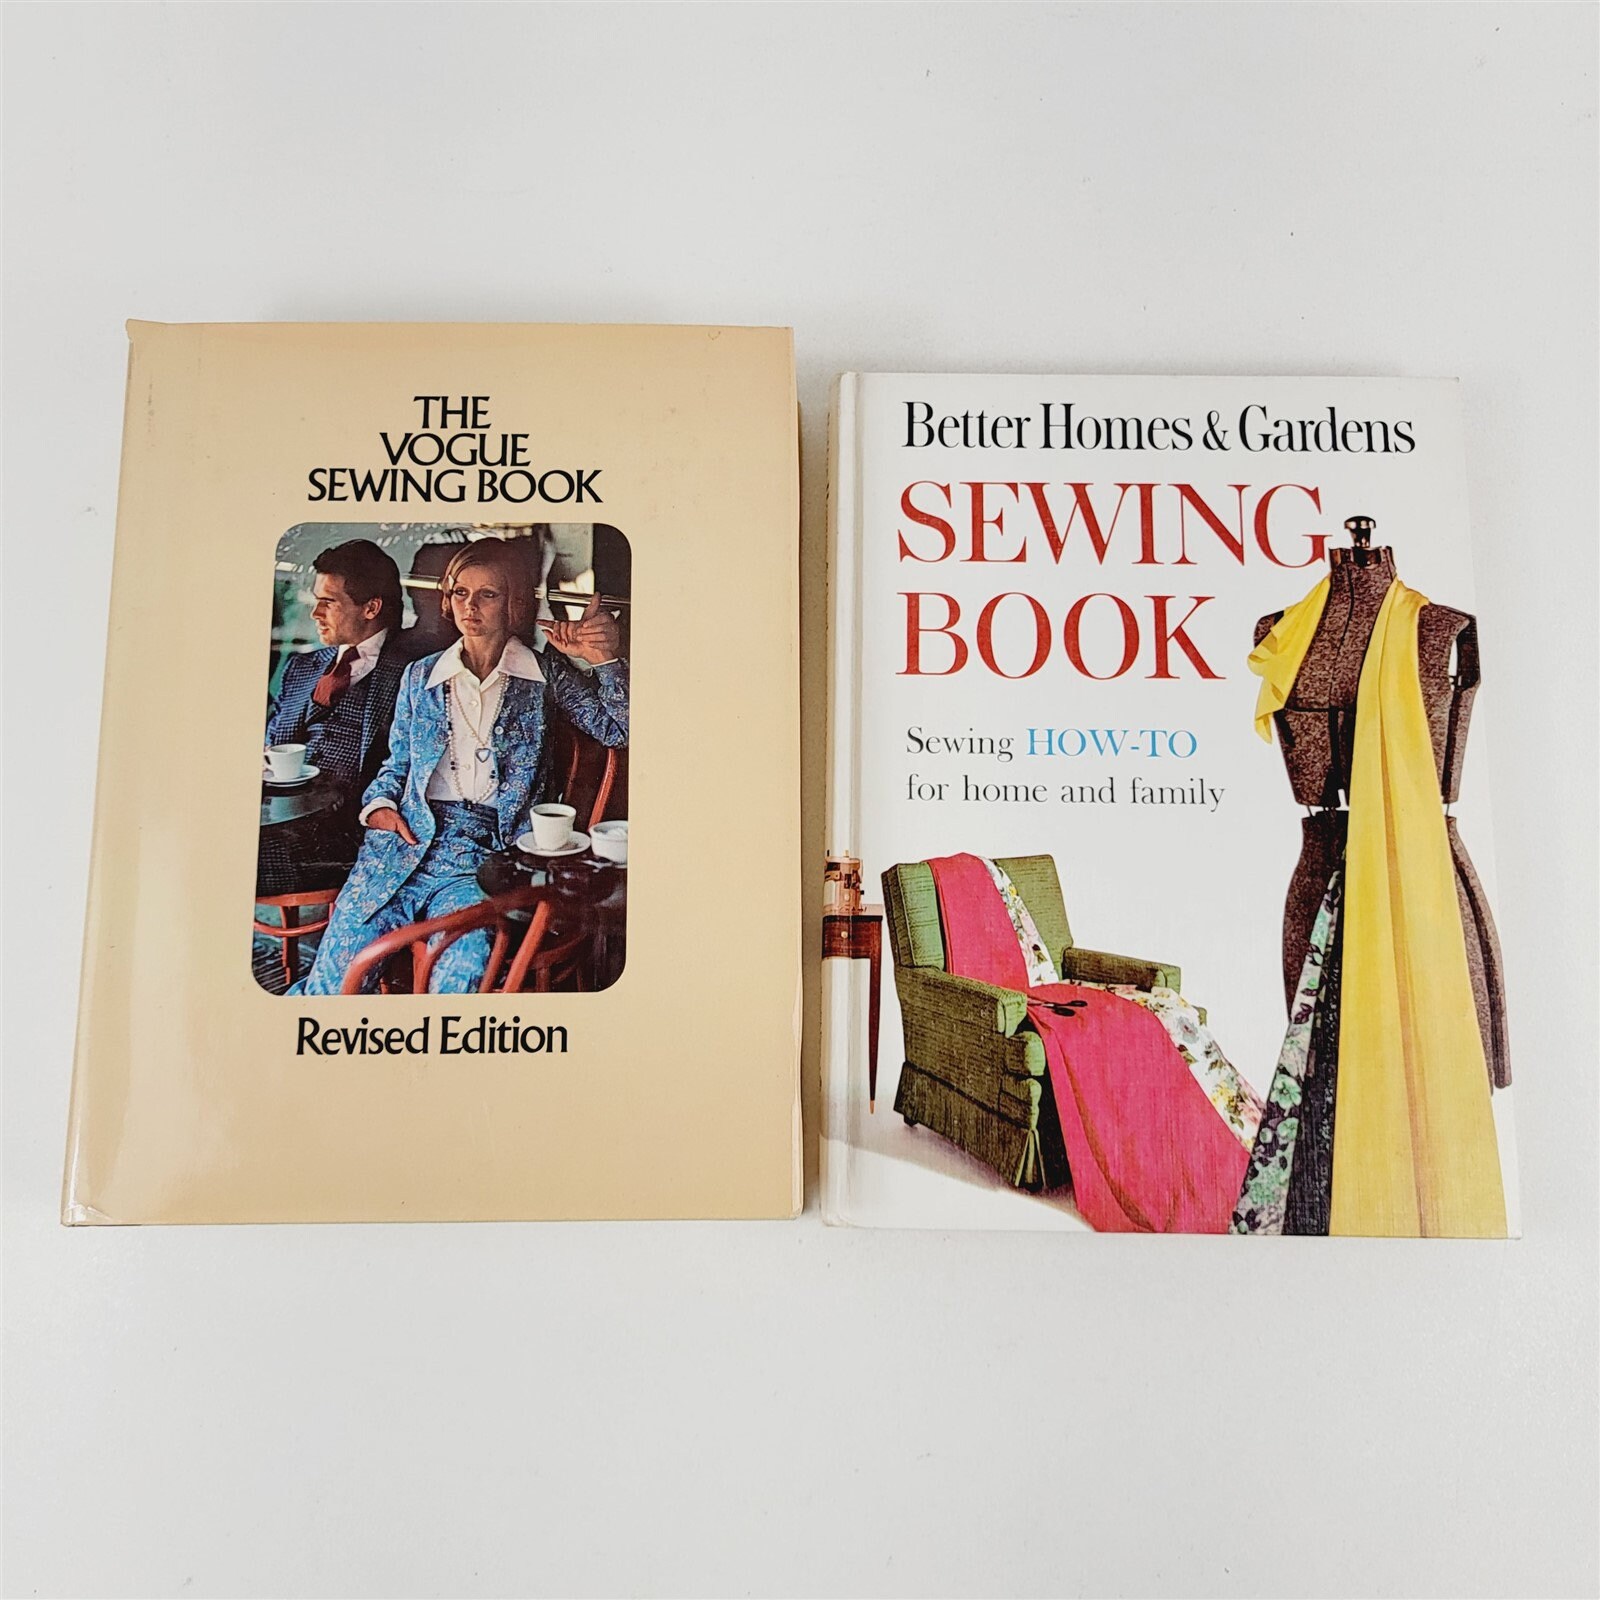 Better Homes and Gardens Sewing Books 1966 Hardcovers – Pretty Old Books